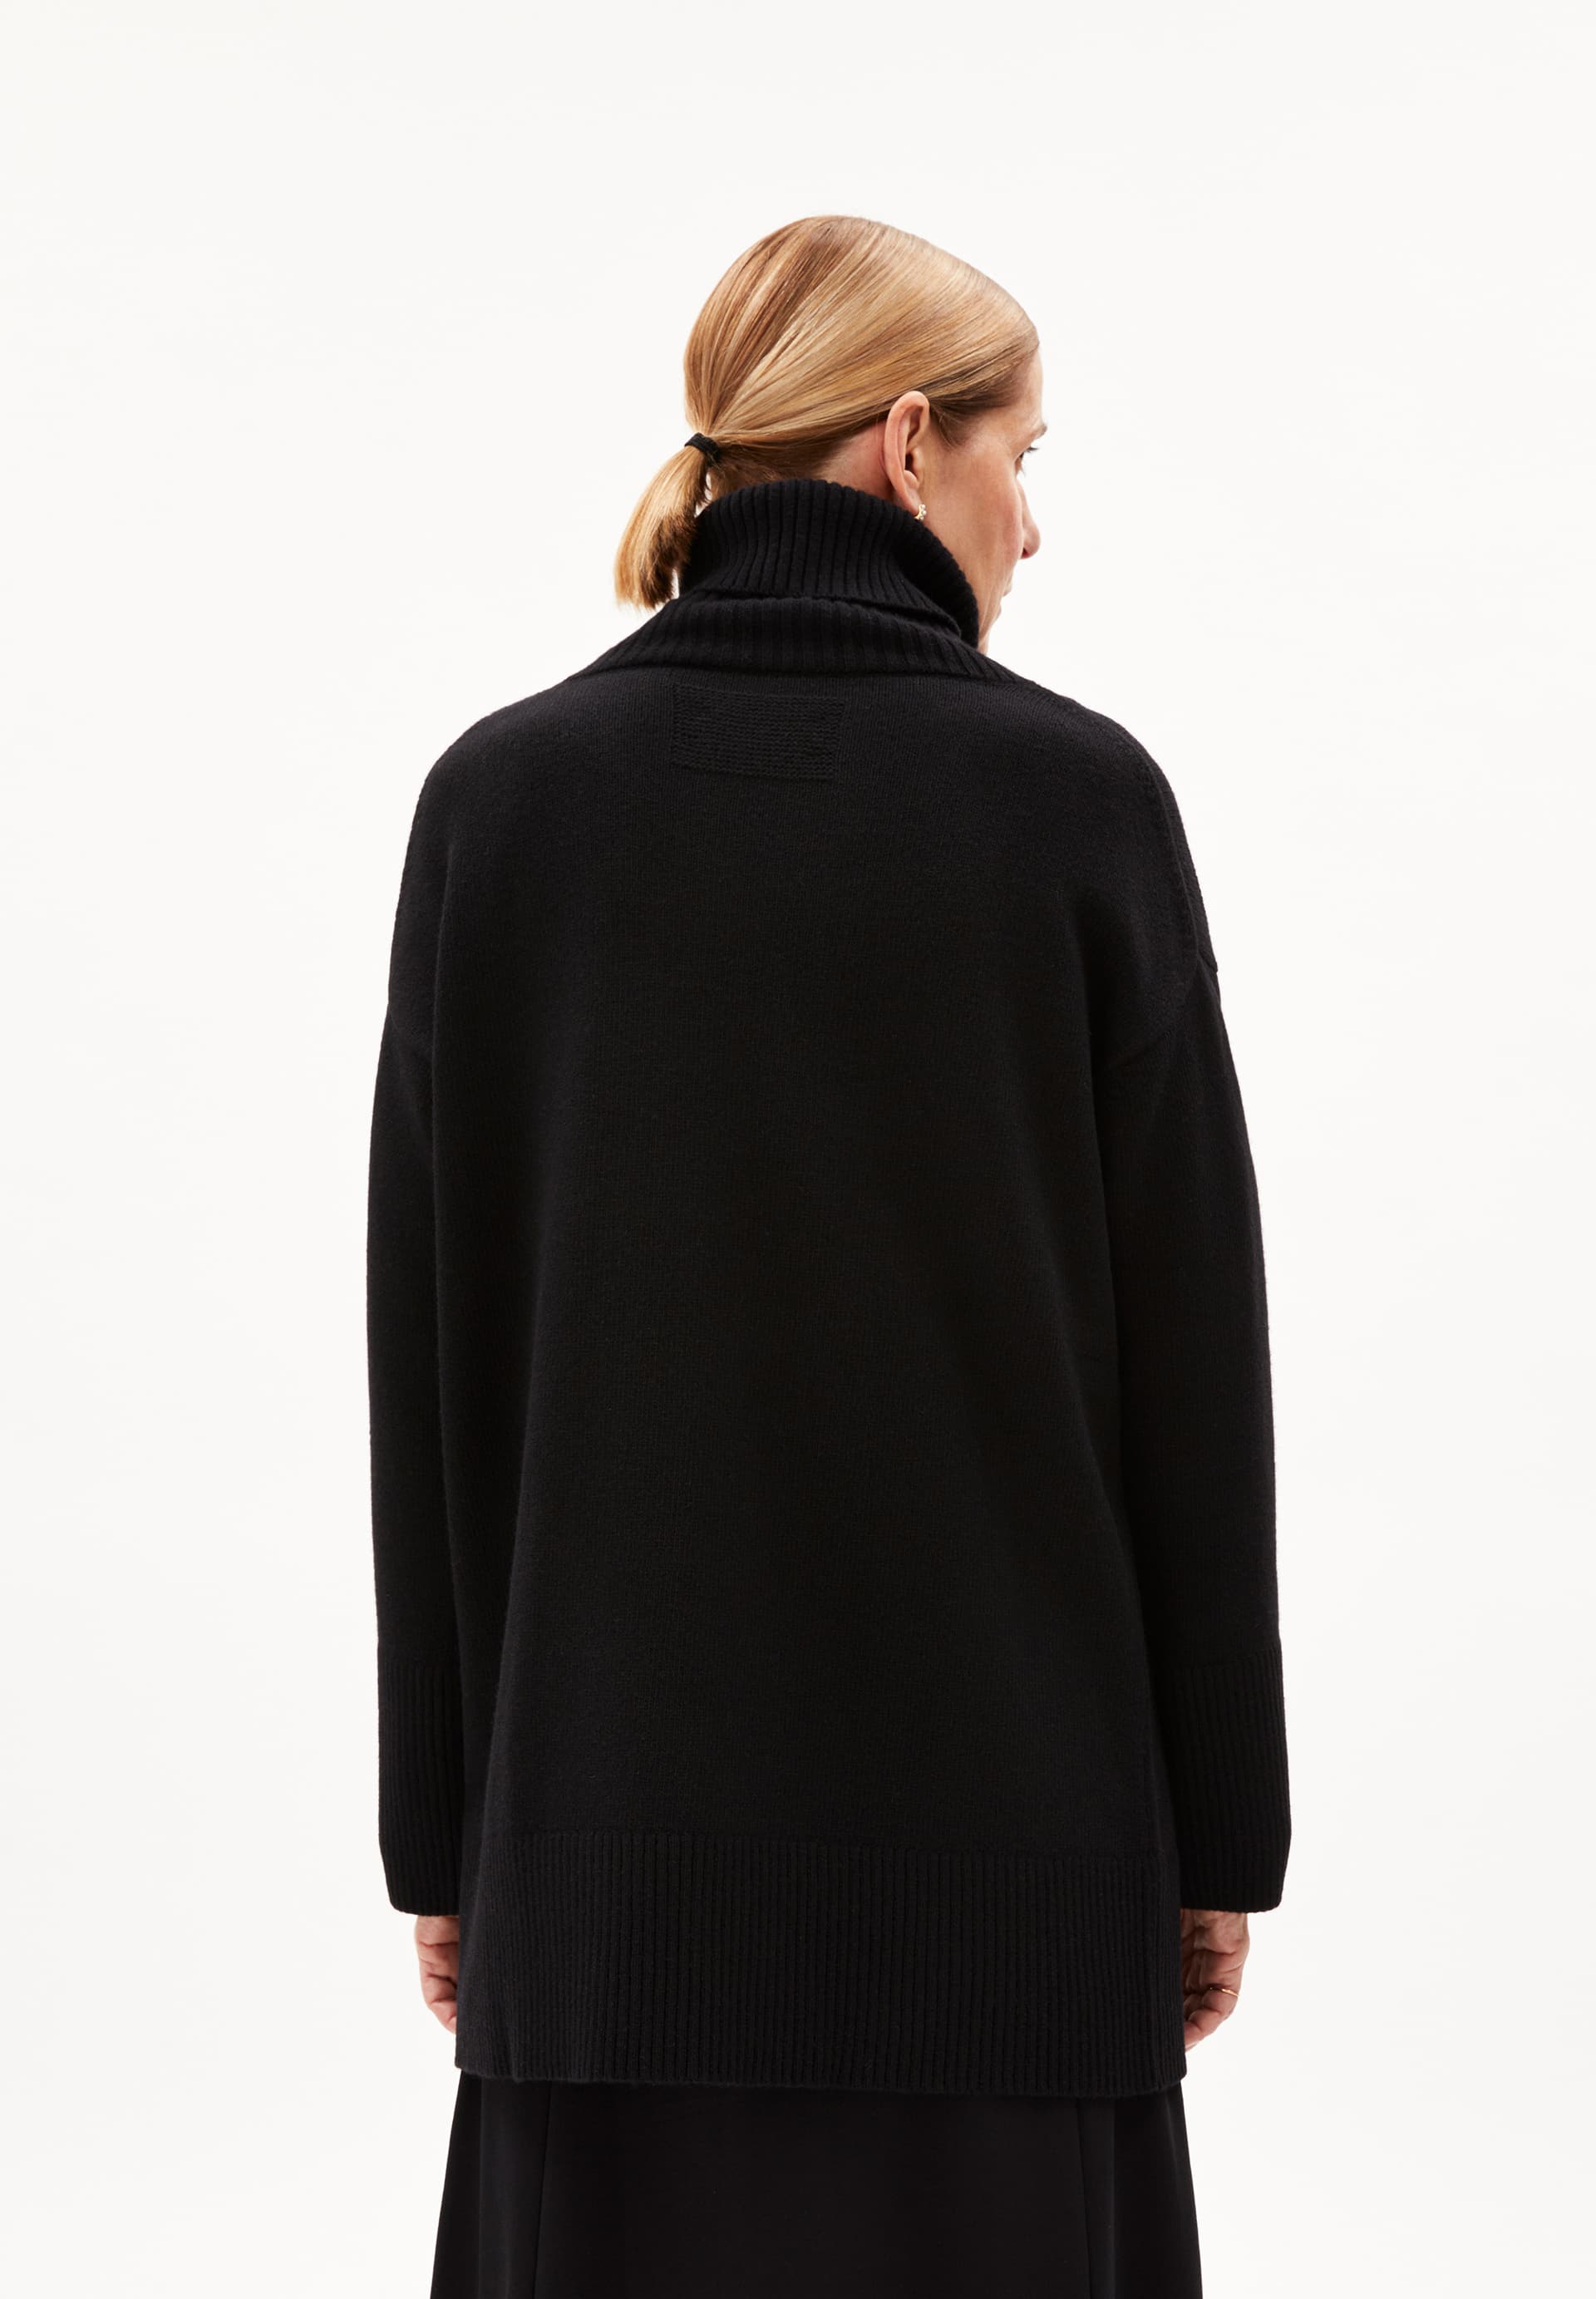 ARDIAA ROLLNECK Sweater Loose Fit made of Organic Wool Mix